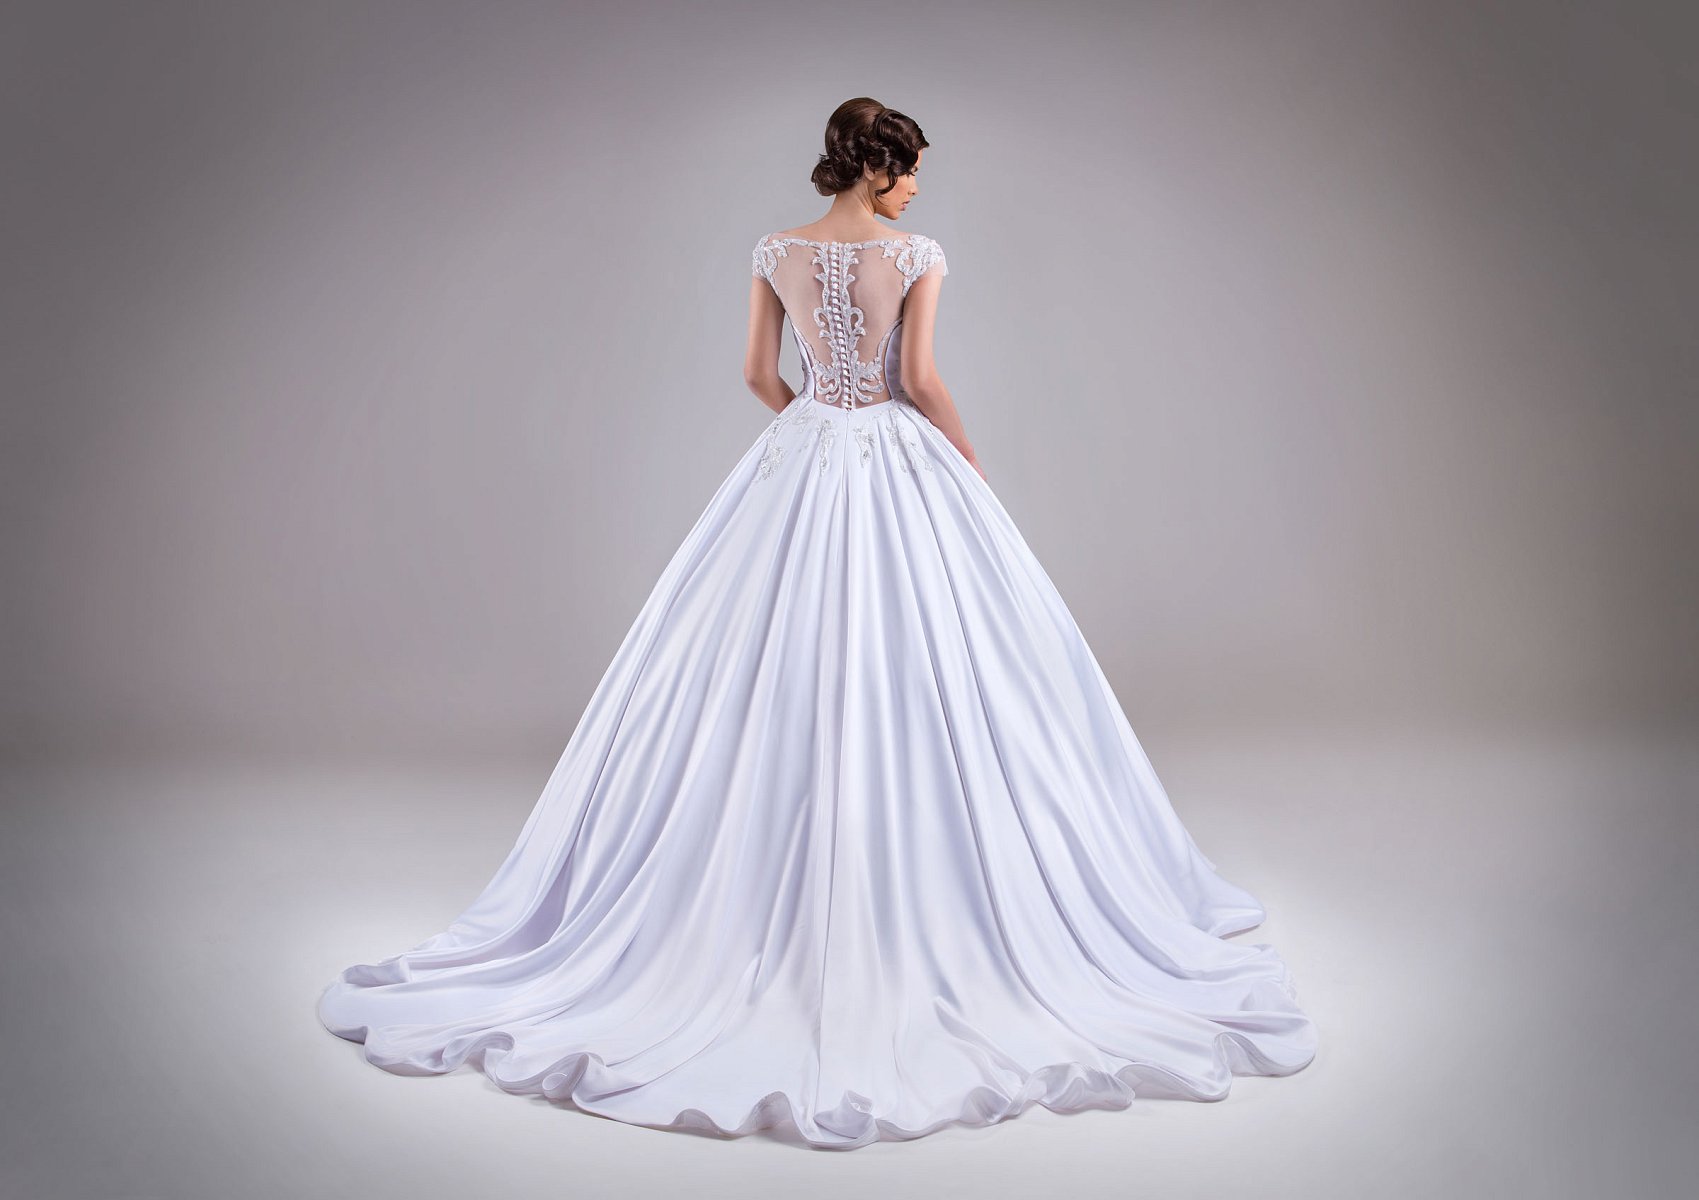 Chrystelle Atallah Collezione 2015 - Sposa - 1